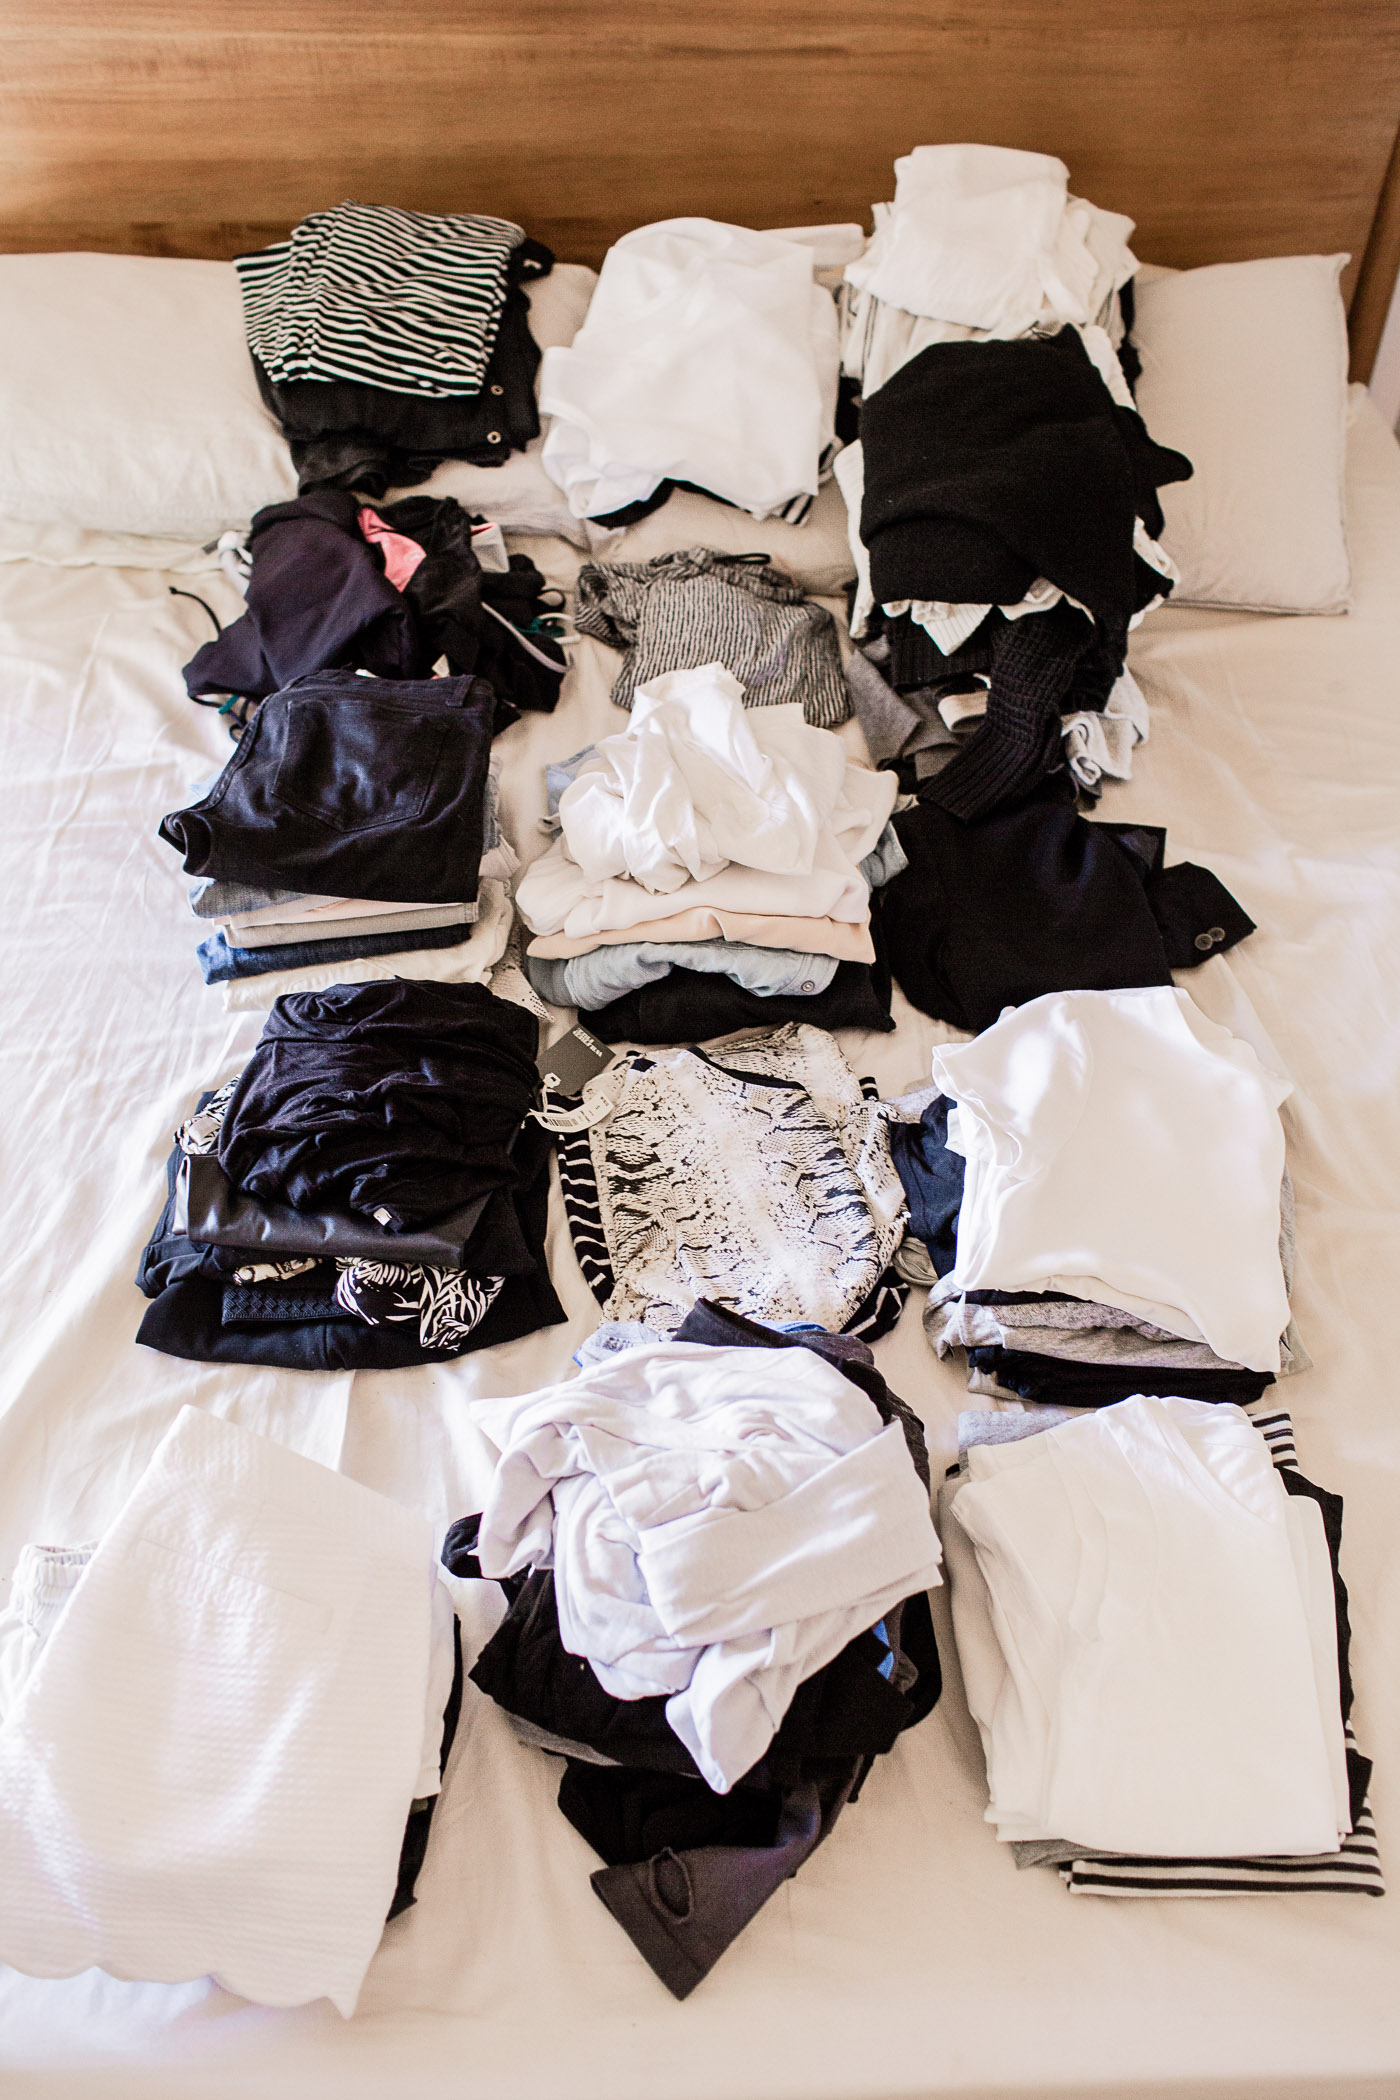 How to clean out your closet, plus the before photos!